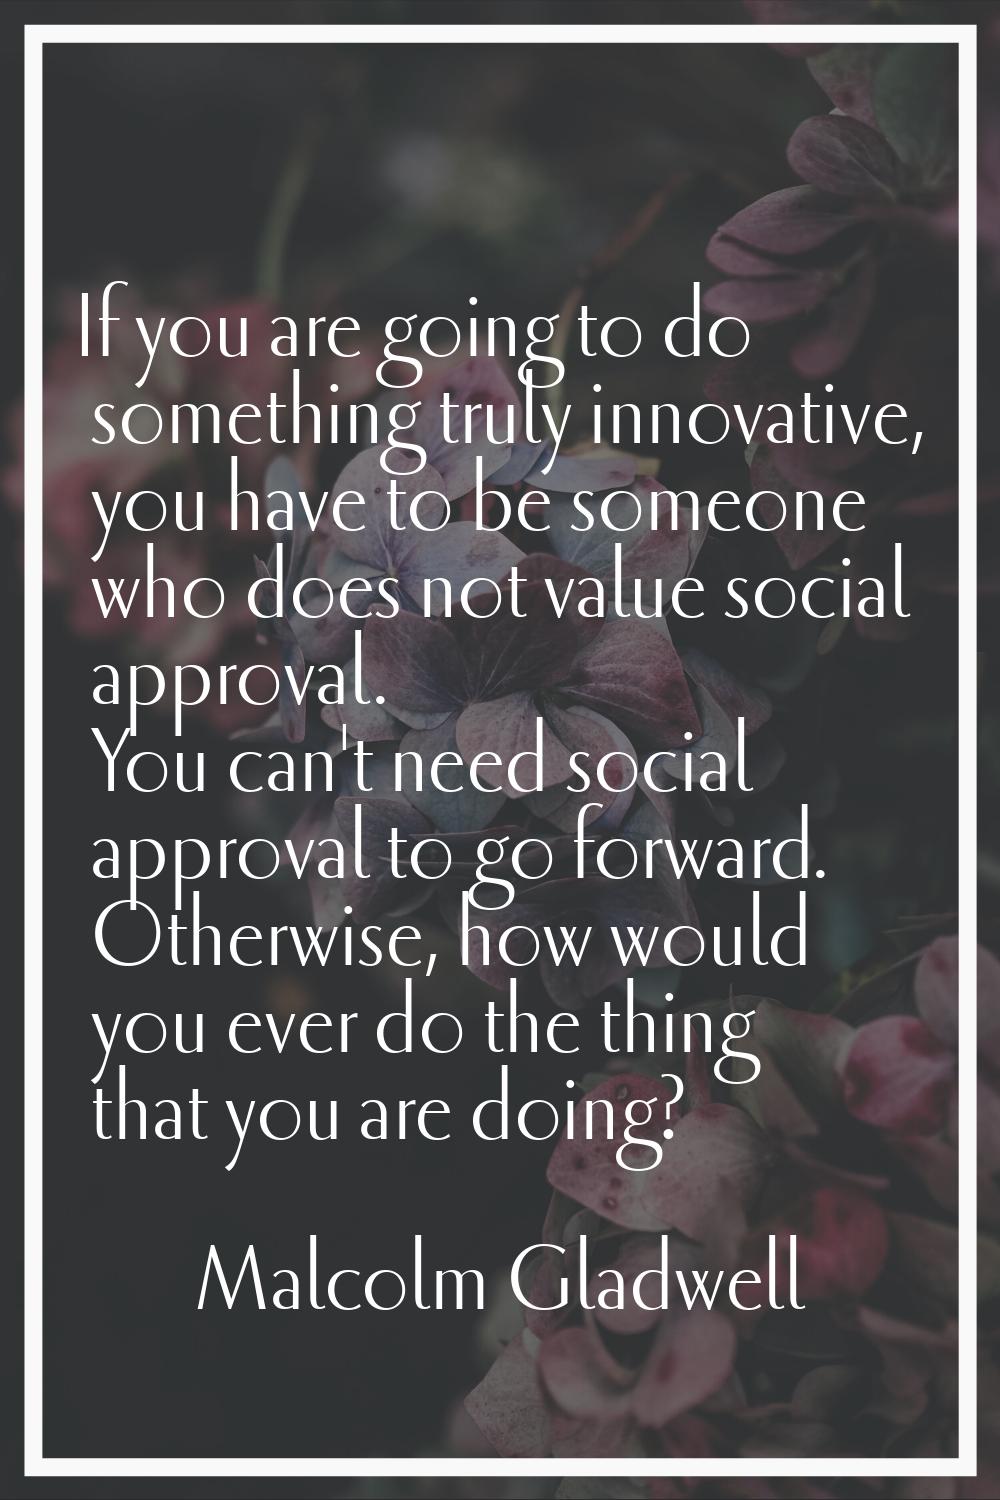 If you are going to do something truly innovative, you have to be someone who does not value social